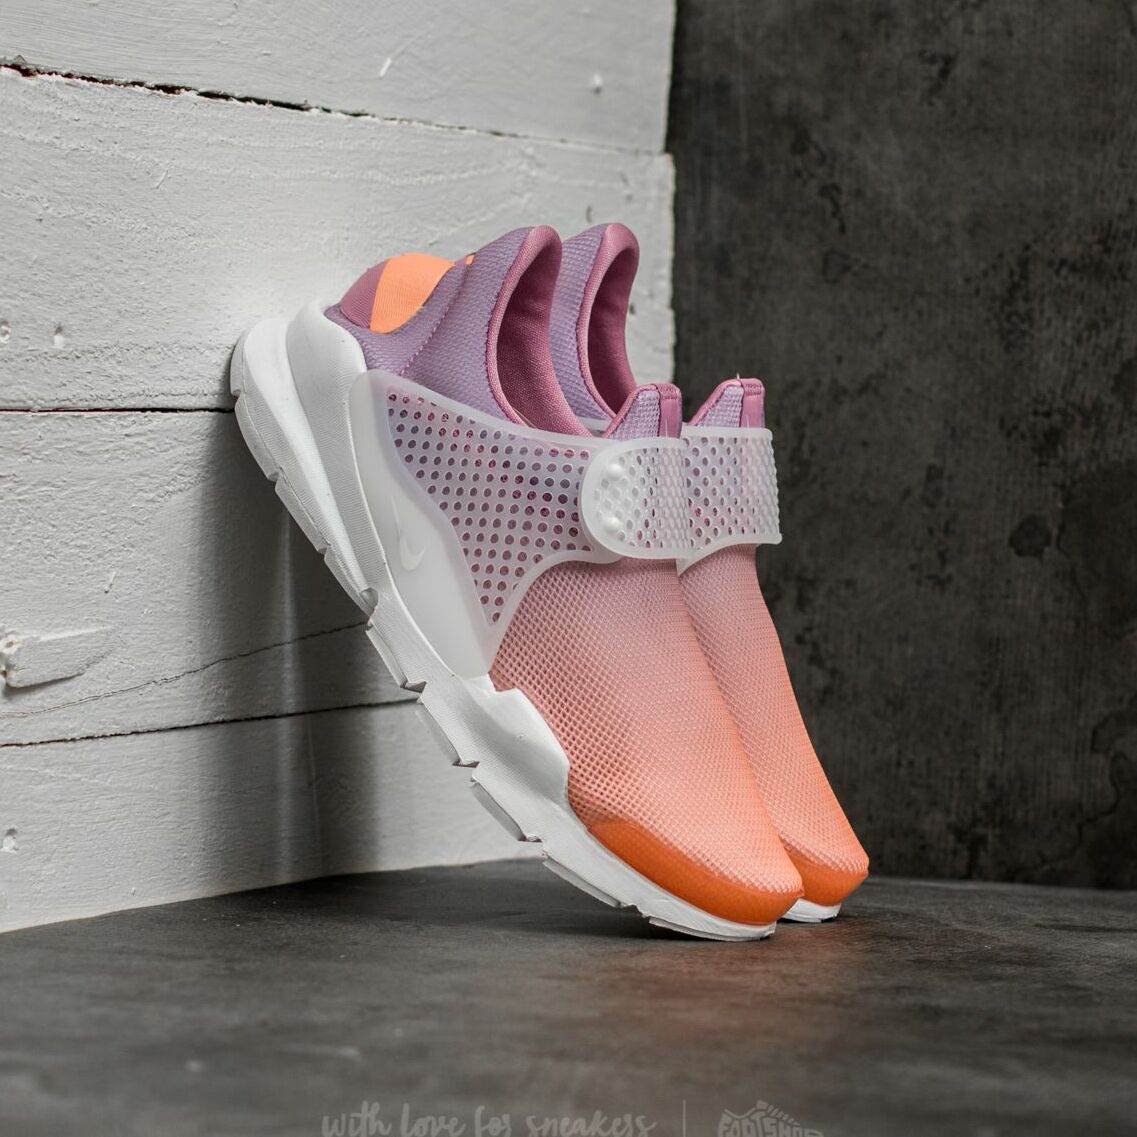 Nike Wmns Sock Dart Br Sunset Glow/ White-Orchid 896446-800